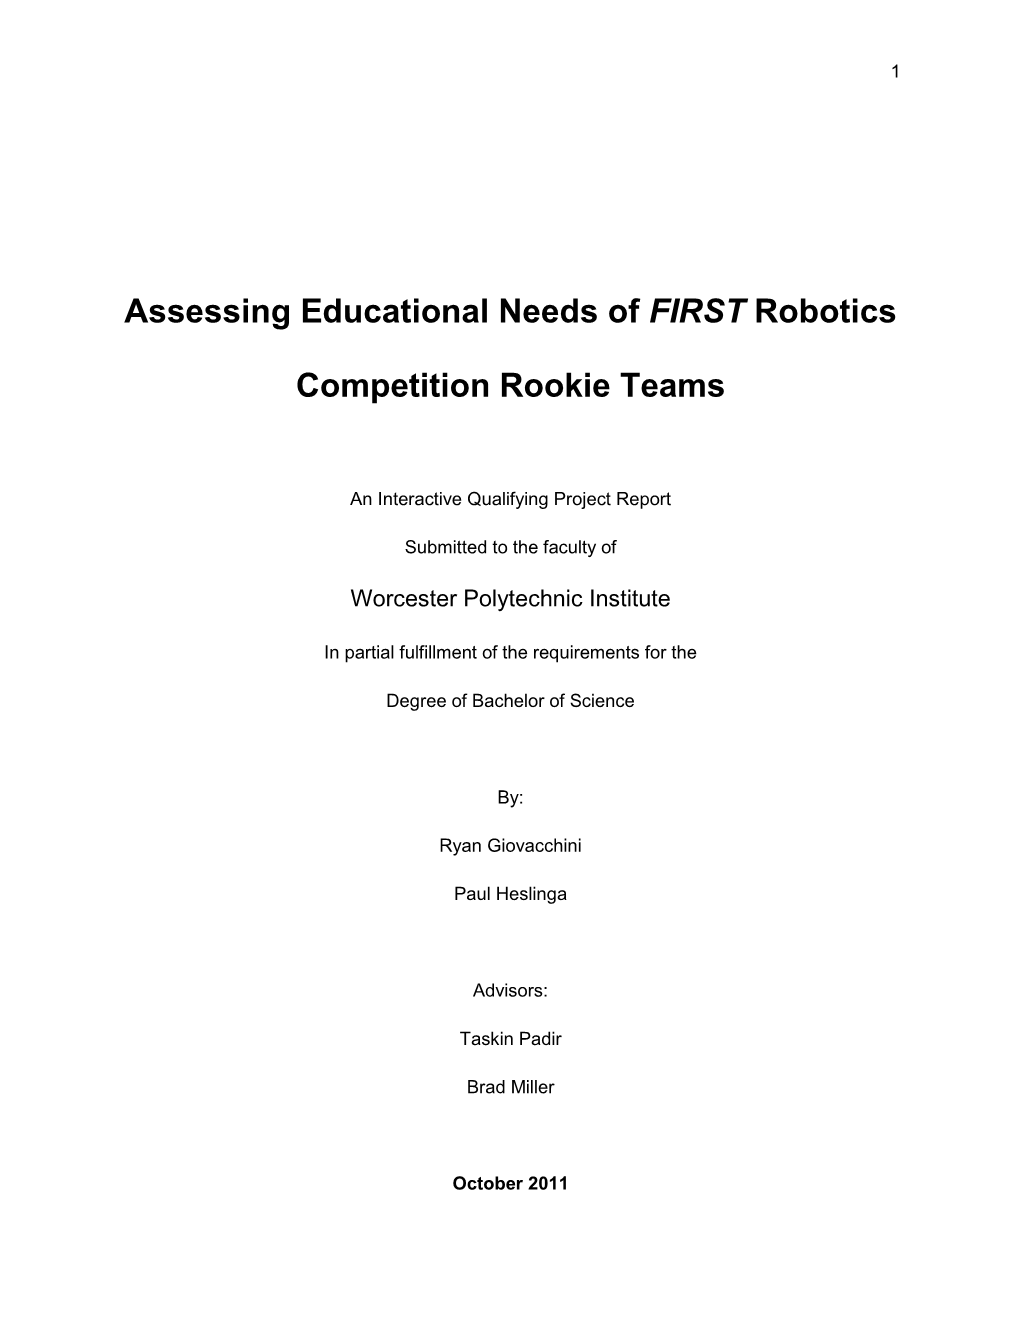 Assessing Educational Needs of FIRST Robotics Competition Rookie Teams